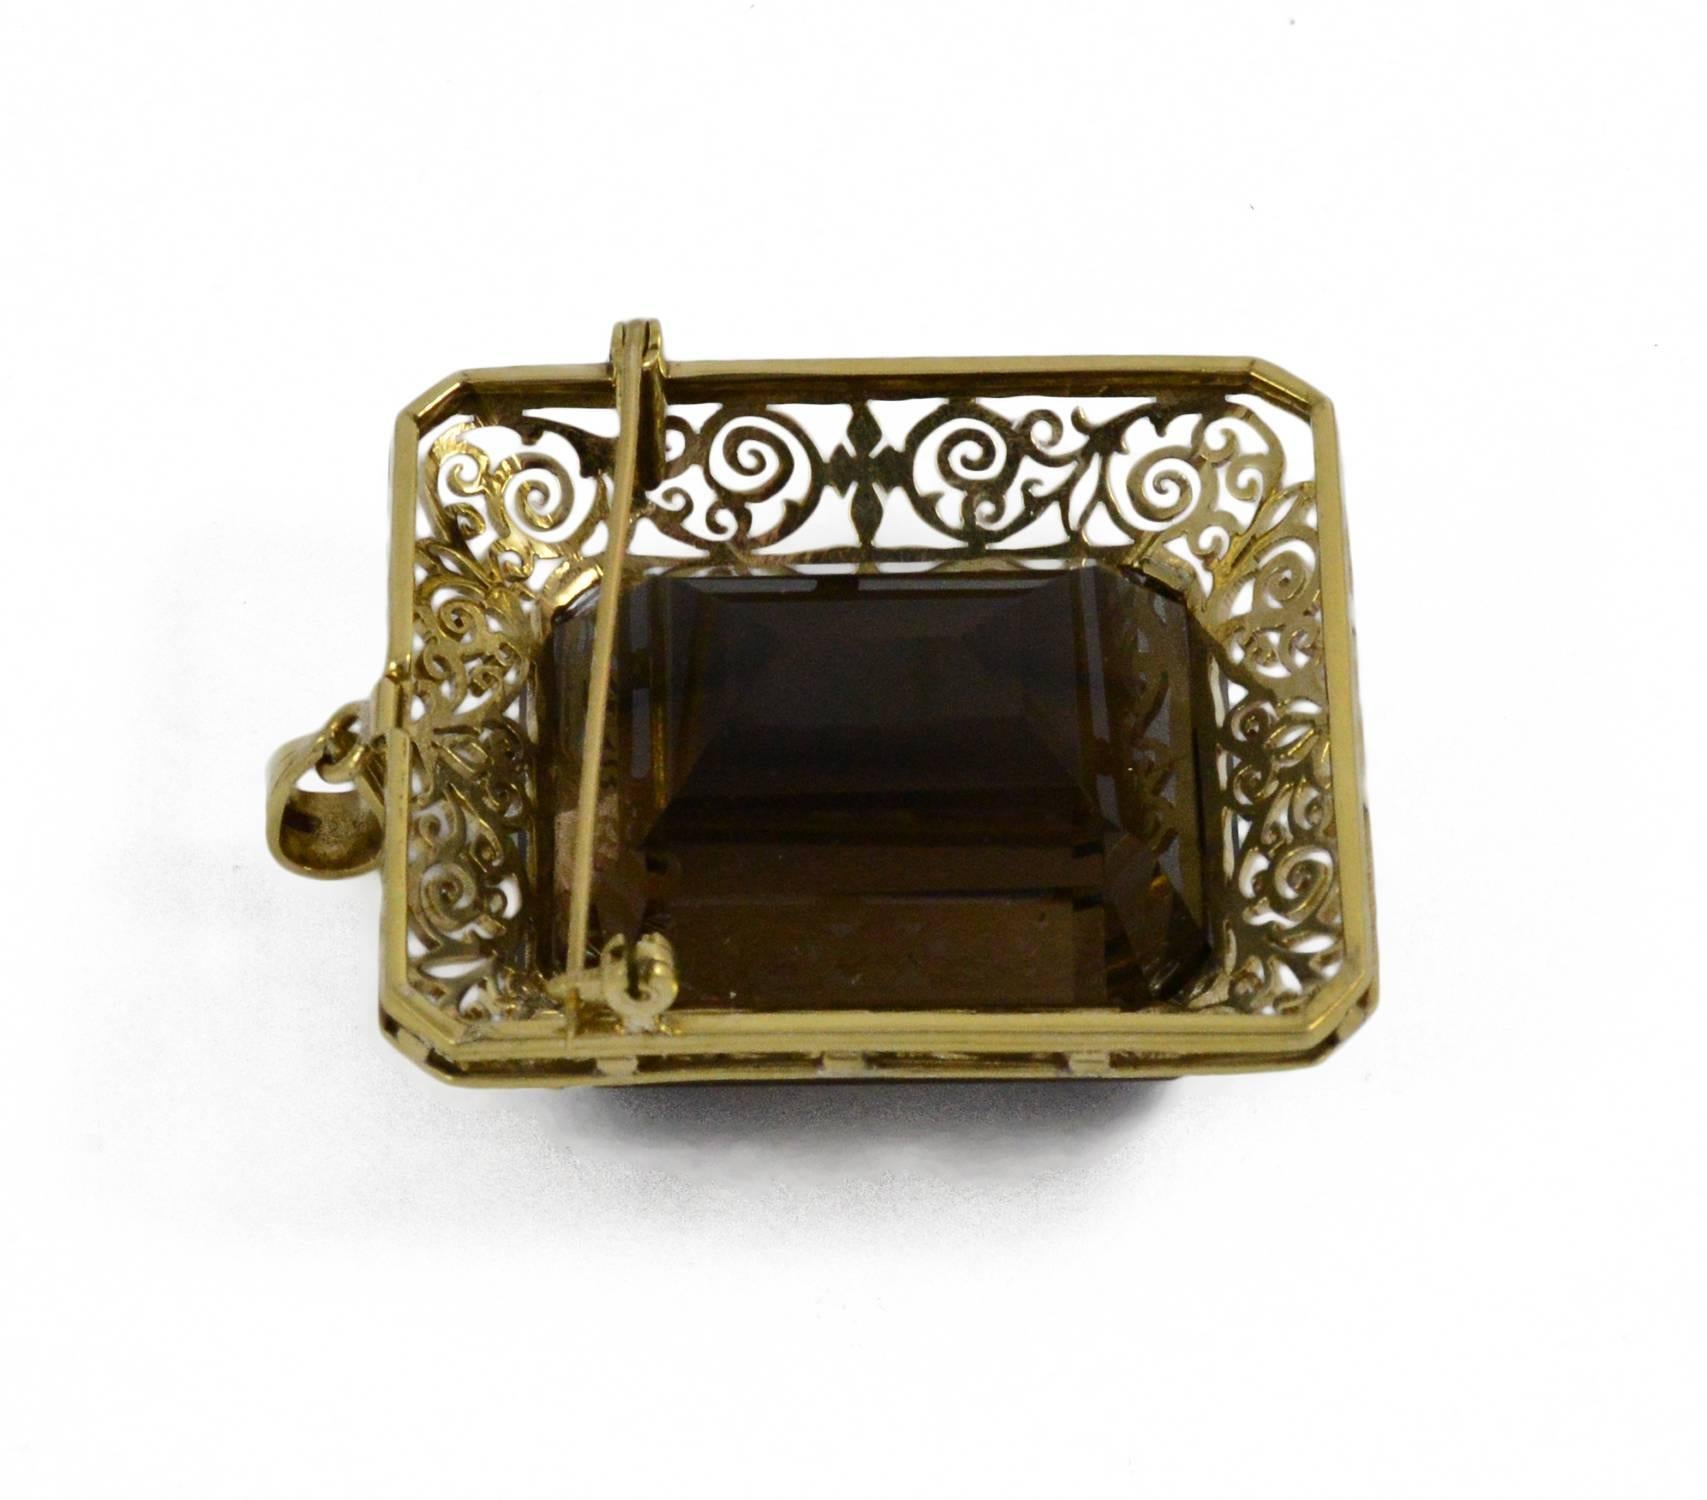 A large bold rectangular step cut smokey quartz set in a intricate custom made 14kt yellow gold frame. This pendant also can be worn as a brooch and comes with a 18 inch gold chain. It is in excellent condition.